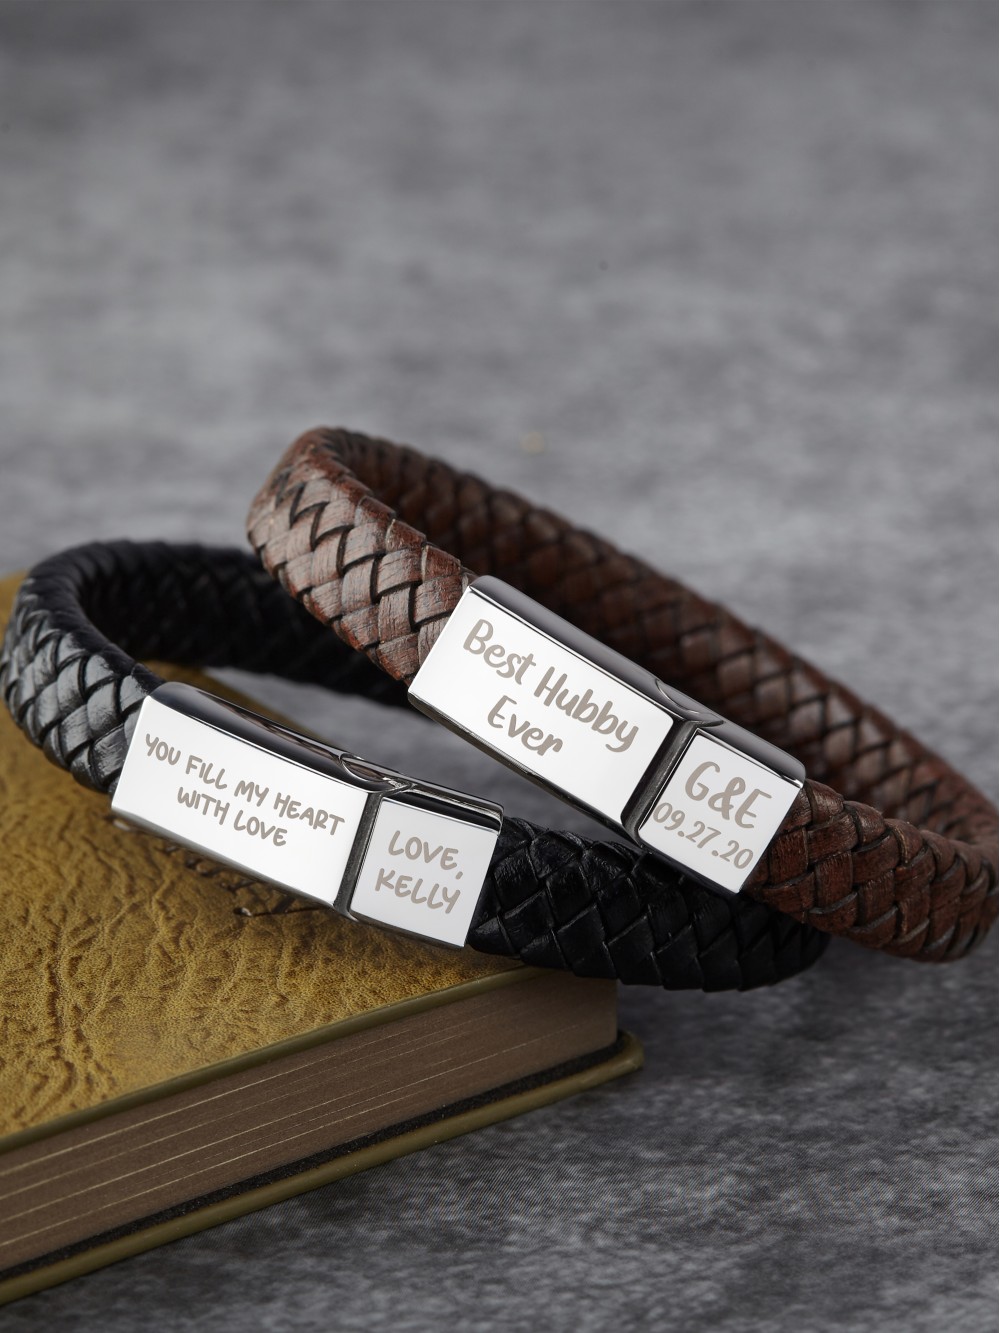 Know In Your Heart You Are Loved Leather Bracelet Message Bracelet Leather Braided Bracelet Leather Jewelry Message Jewelry